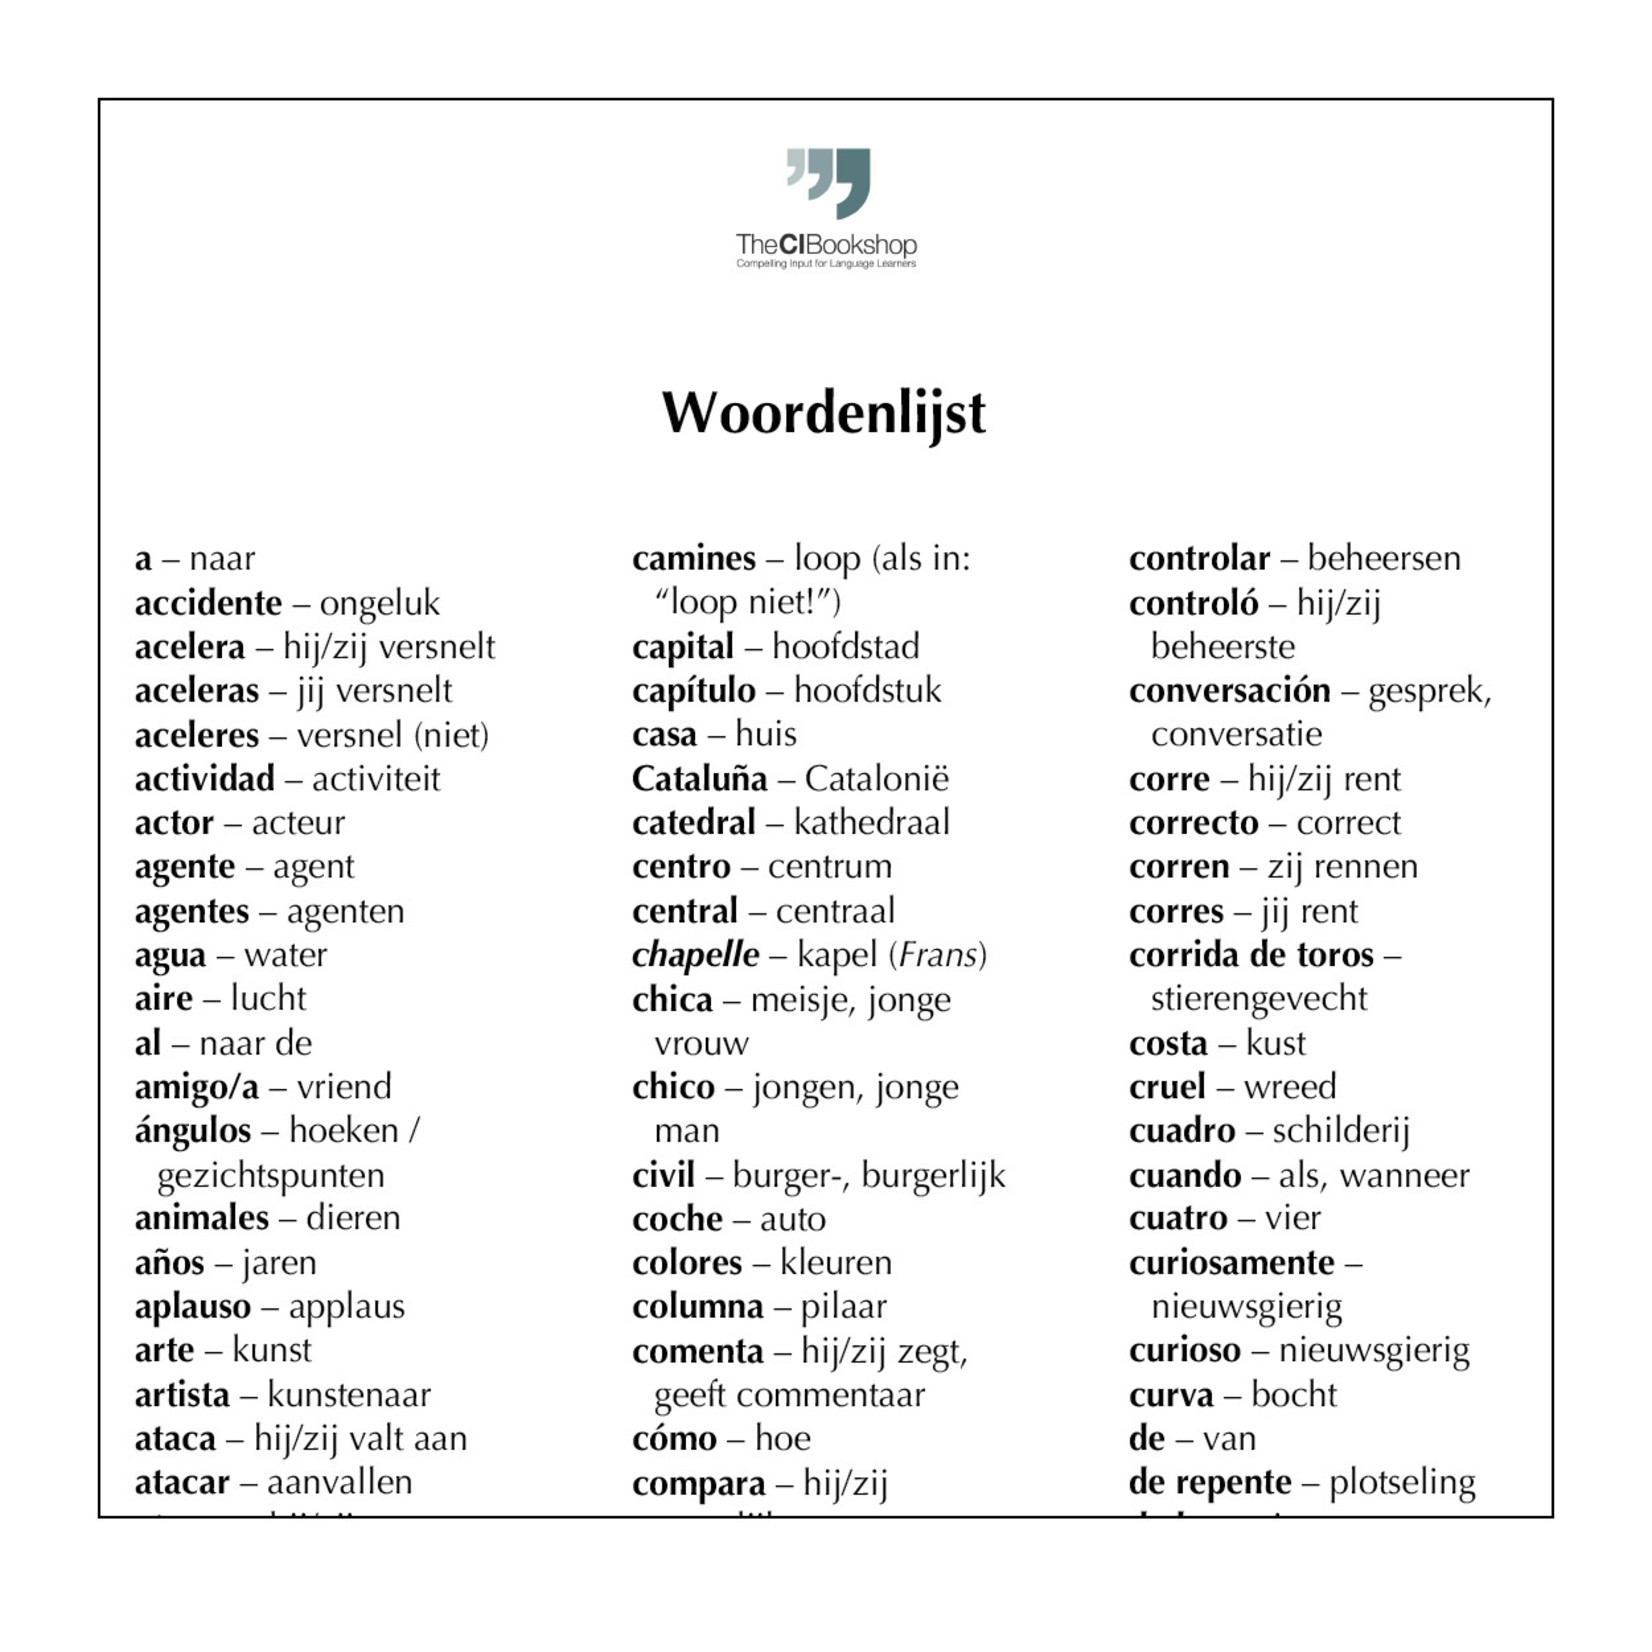 Dutch glossary for Las sombras